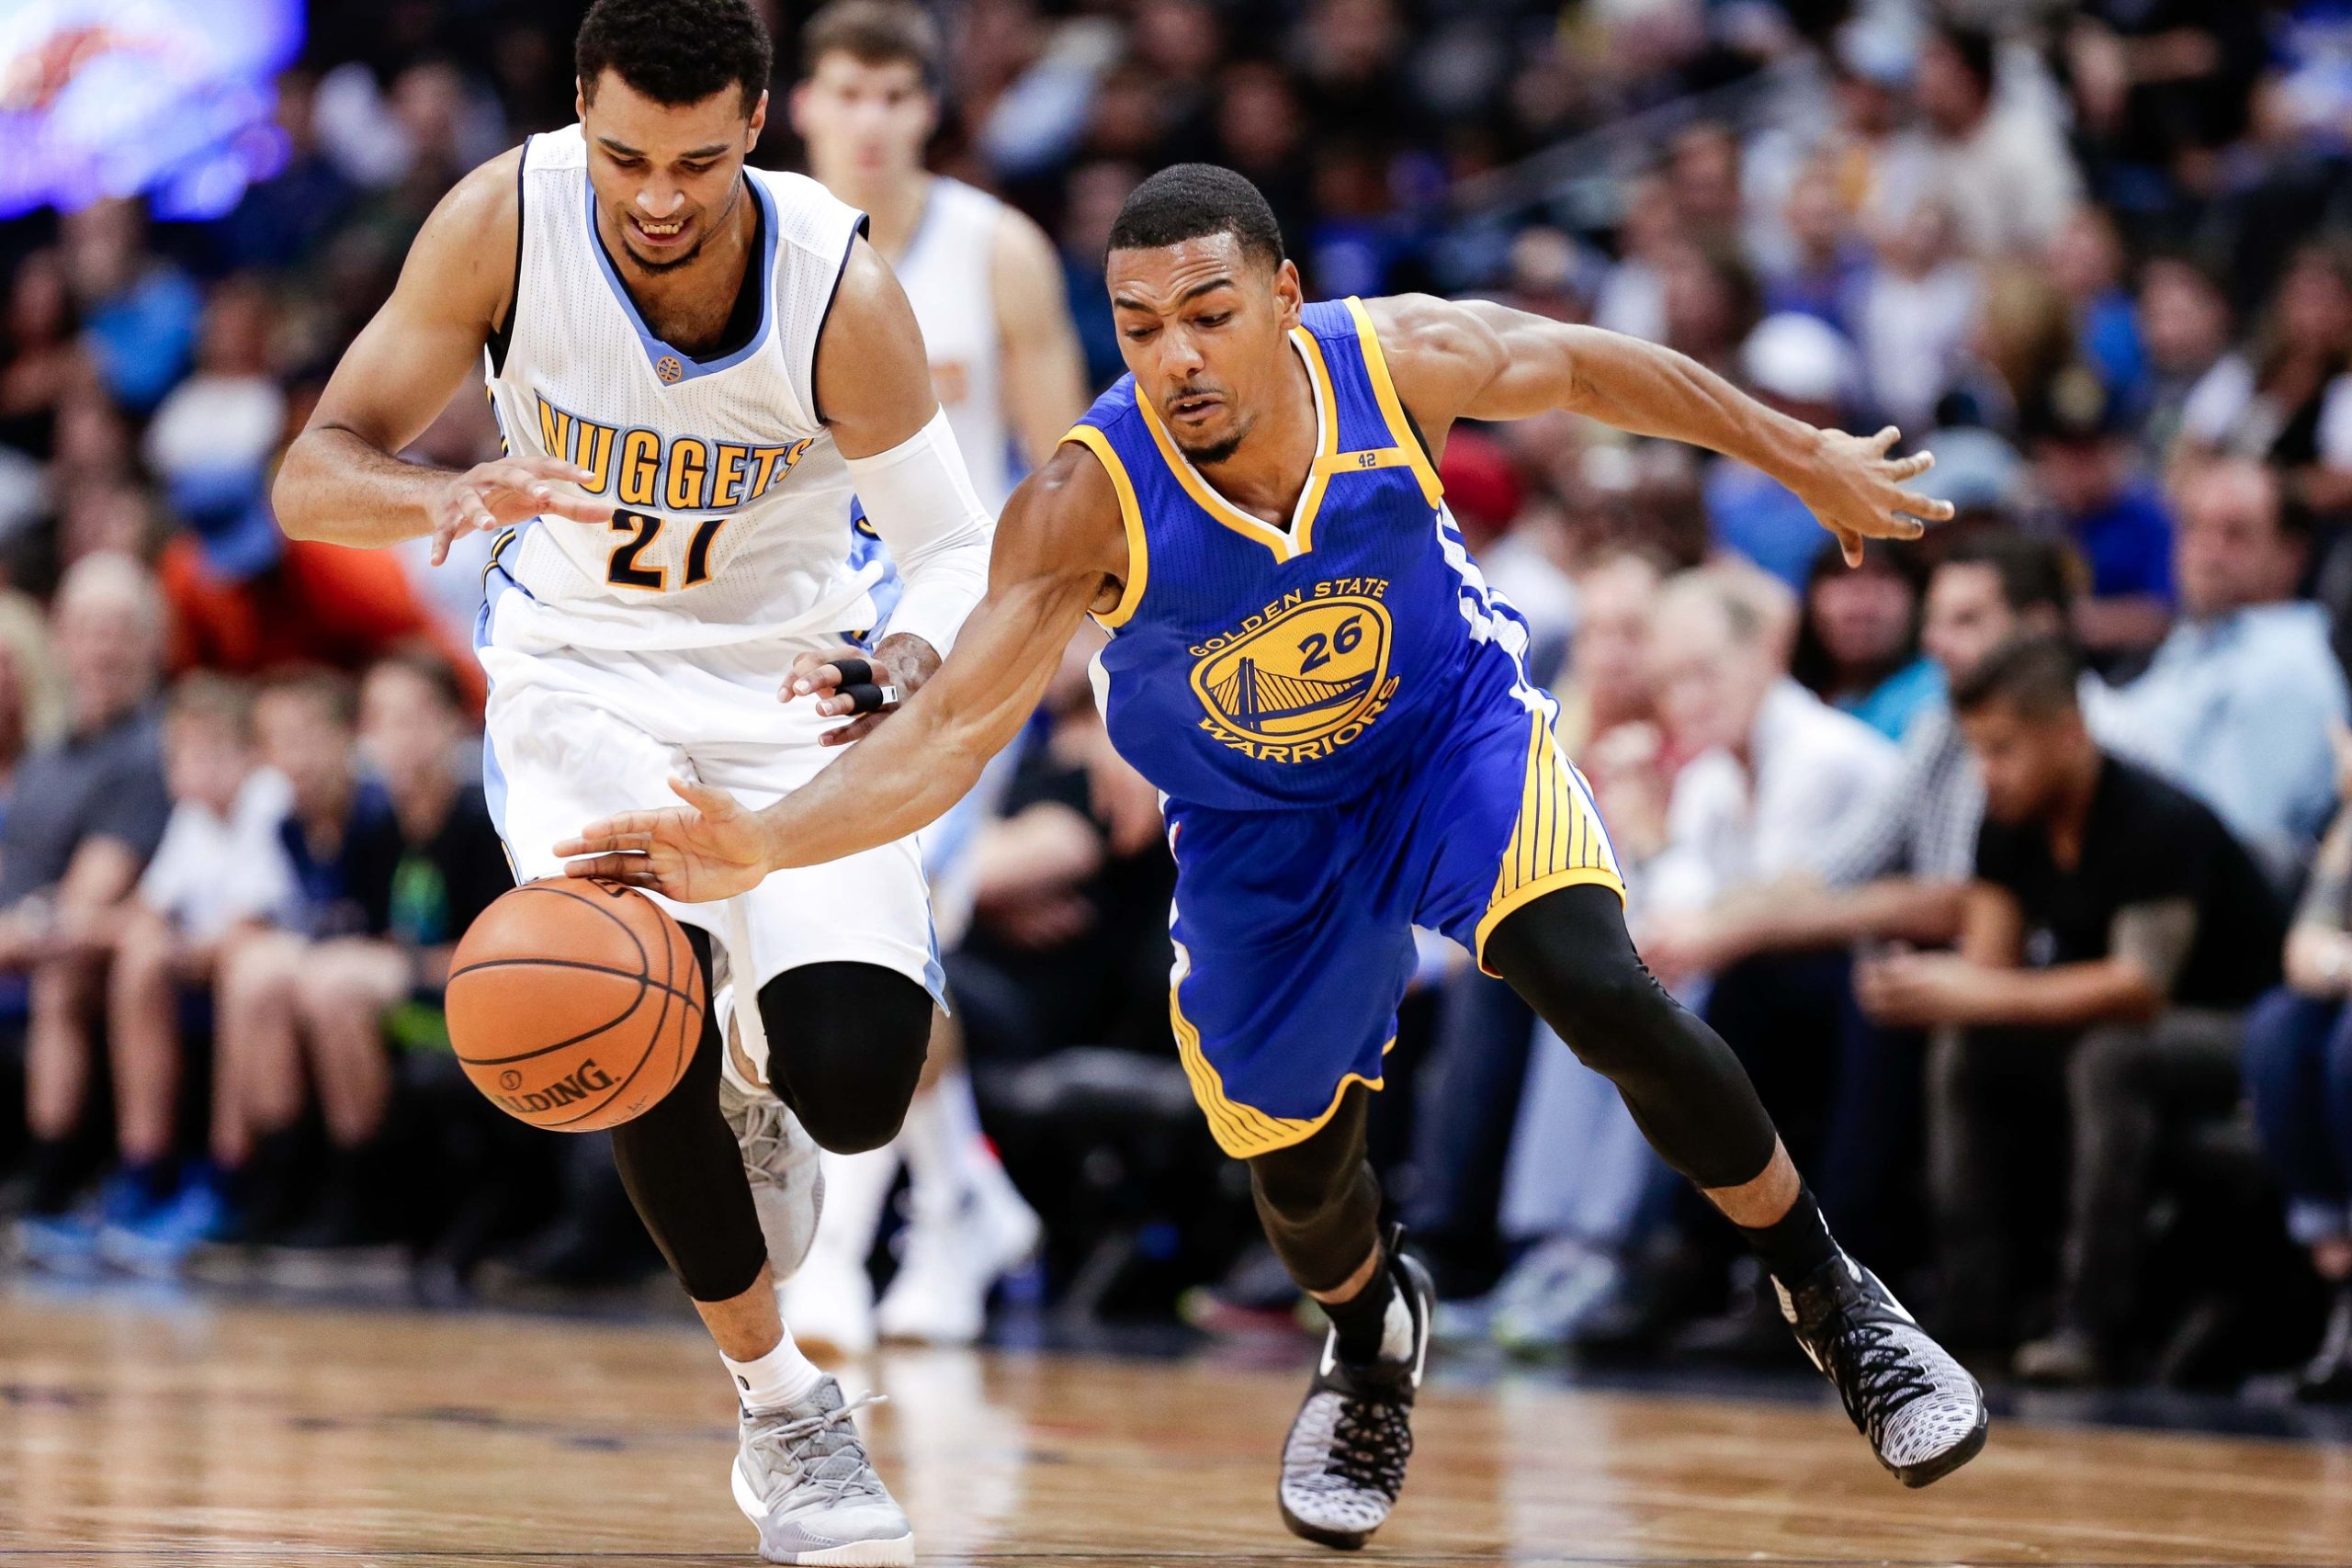 Oct 14, 2016; Denver, CO, USA; New Celtics assistant coach and former Golden State Warriors guard Phil Pressey (26) and Denver Nuggets guard Jamal Murray (27) battle for the ball in overtime at the Pepsi Center. The Warriors won 129-128. Mandatory Credit: Isaiah J. Downing-USA TODAY Sports